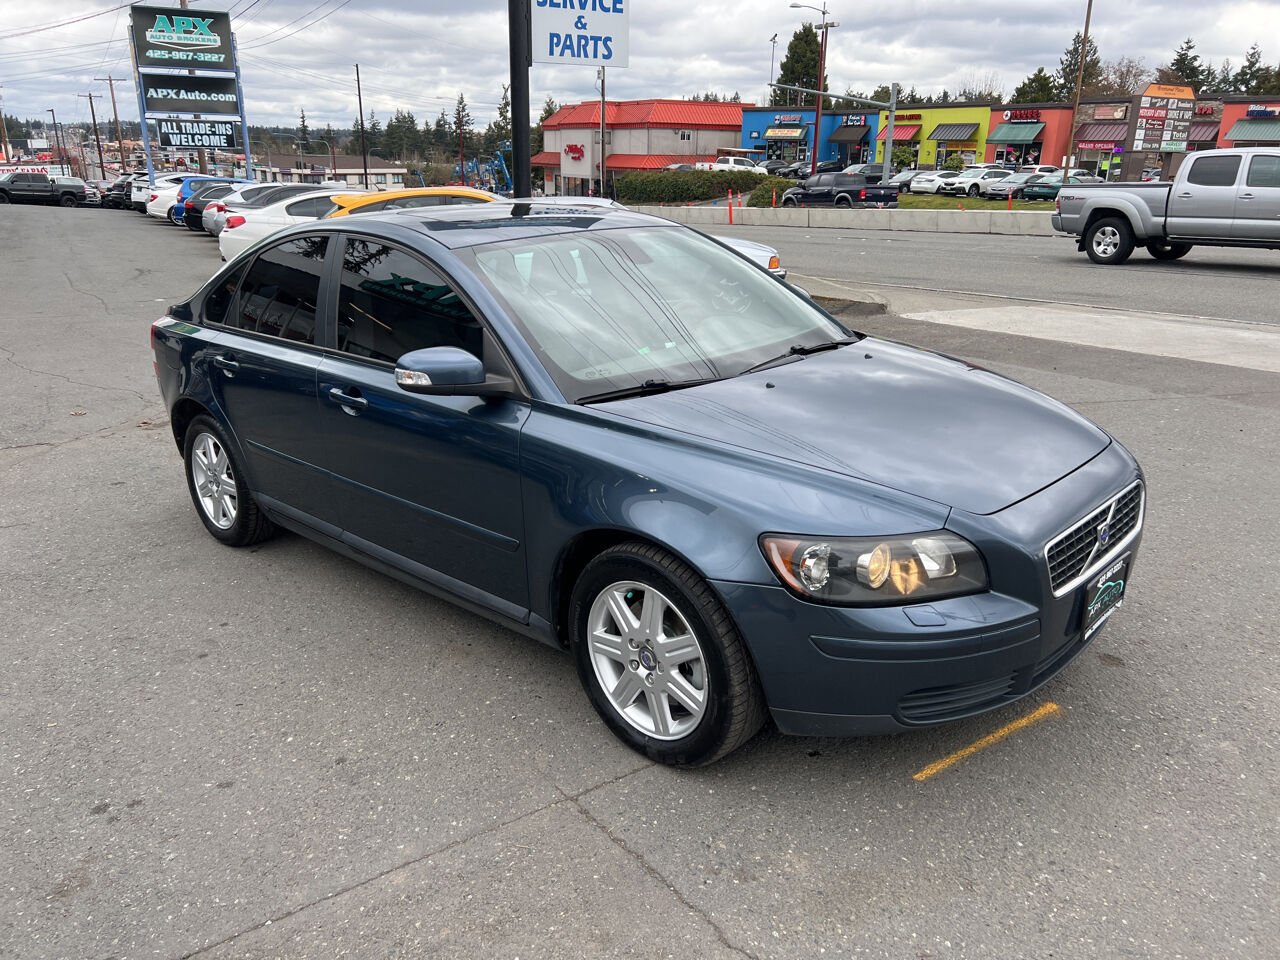 Used 2007 Volvo S40 for Sale Right Now - Autotrader